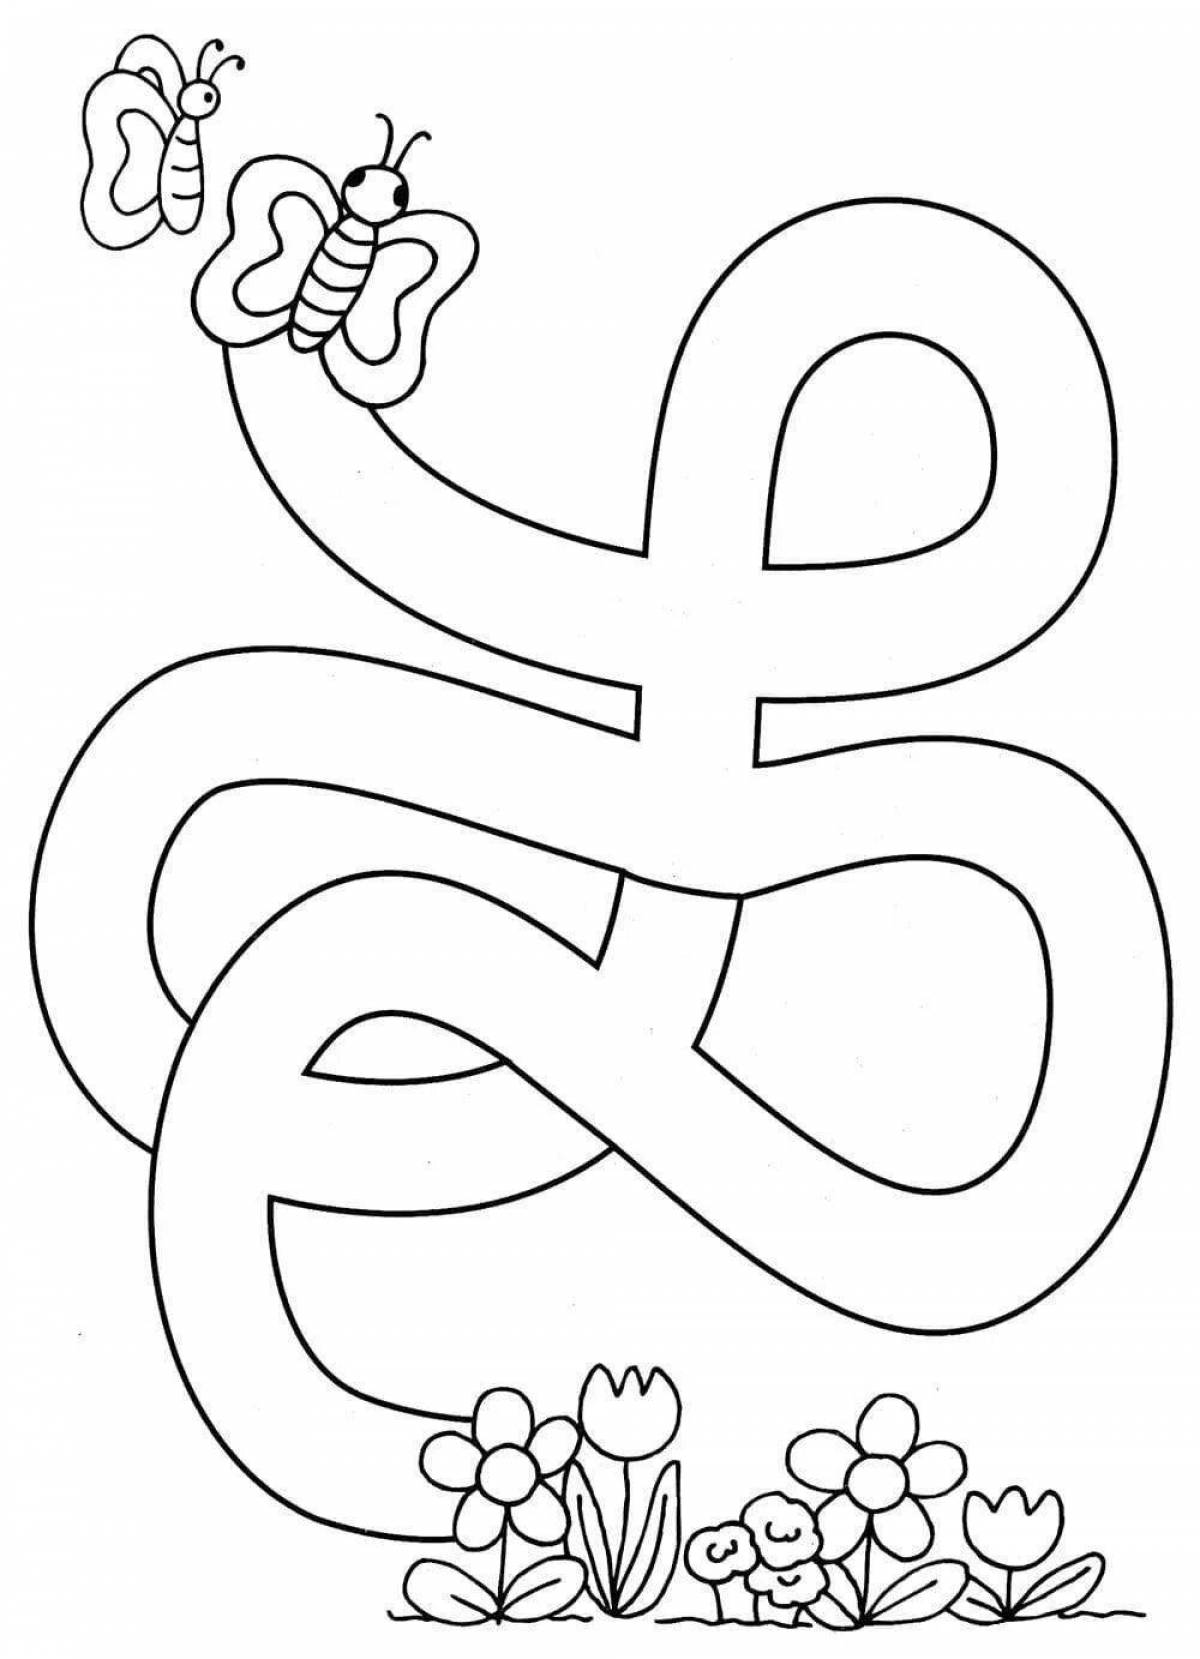 Stimulating maze coloring book for 4-5 year olds